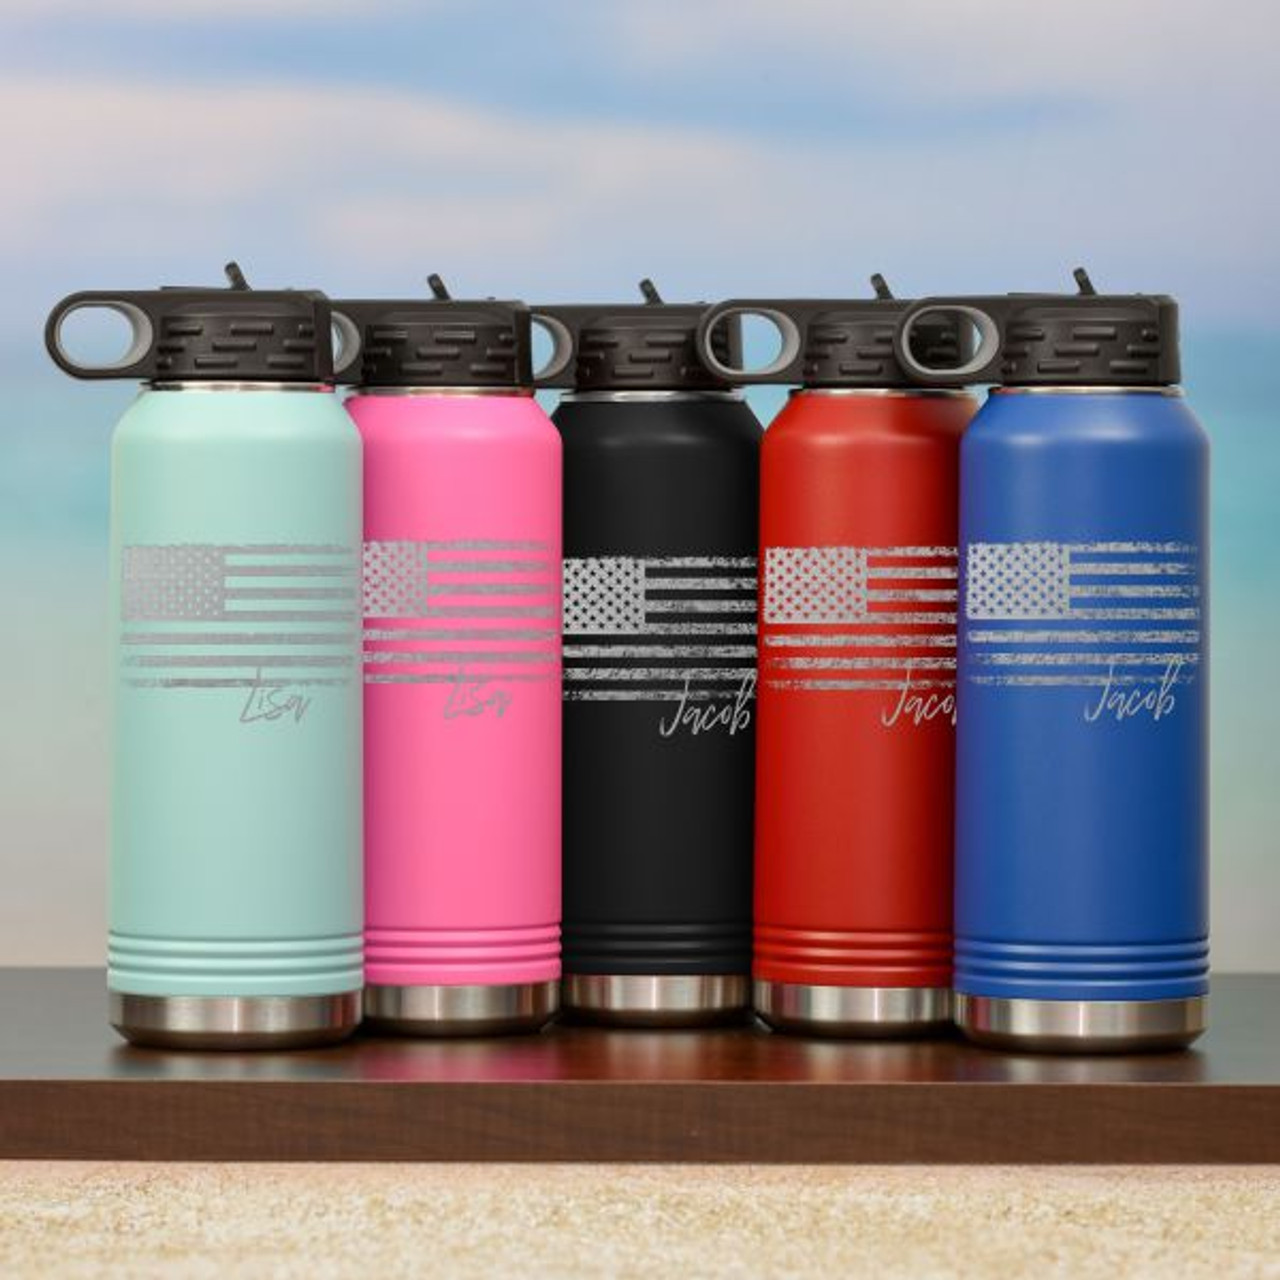 https://cdn11.bigcommerce.com/s-mdwz5t7wme/images/stencil/1280x1280/products/2780/6635/DW5131-The-American-personalized-water-bottle-colors__66333.1603215049.jpg?c=2?imbypass=on